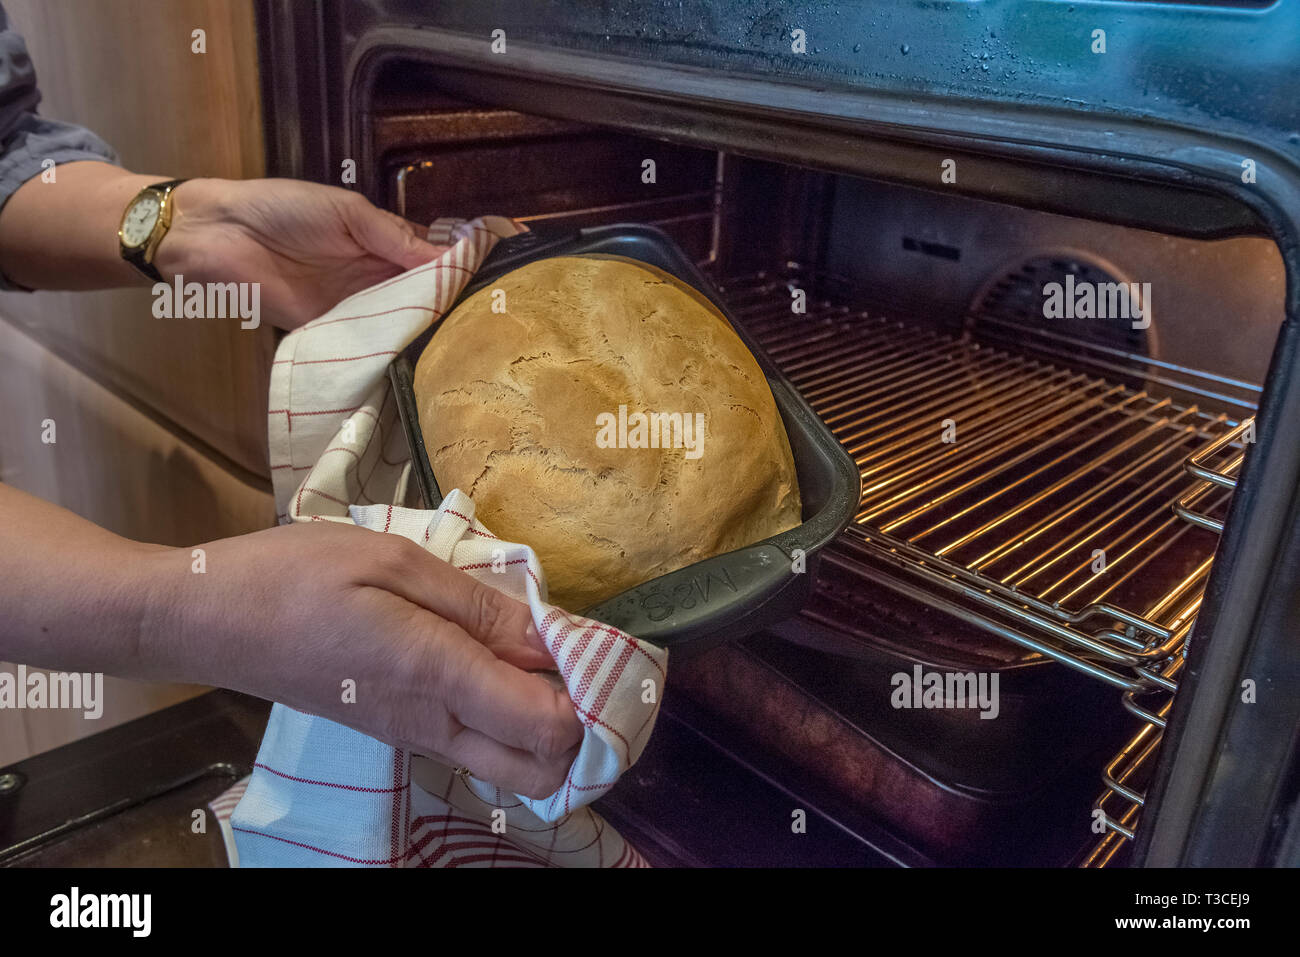 Home baking newly freshly fresh loaf of bread straight from the oven. Stock Photo